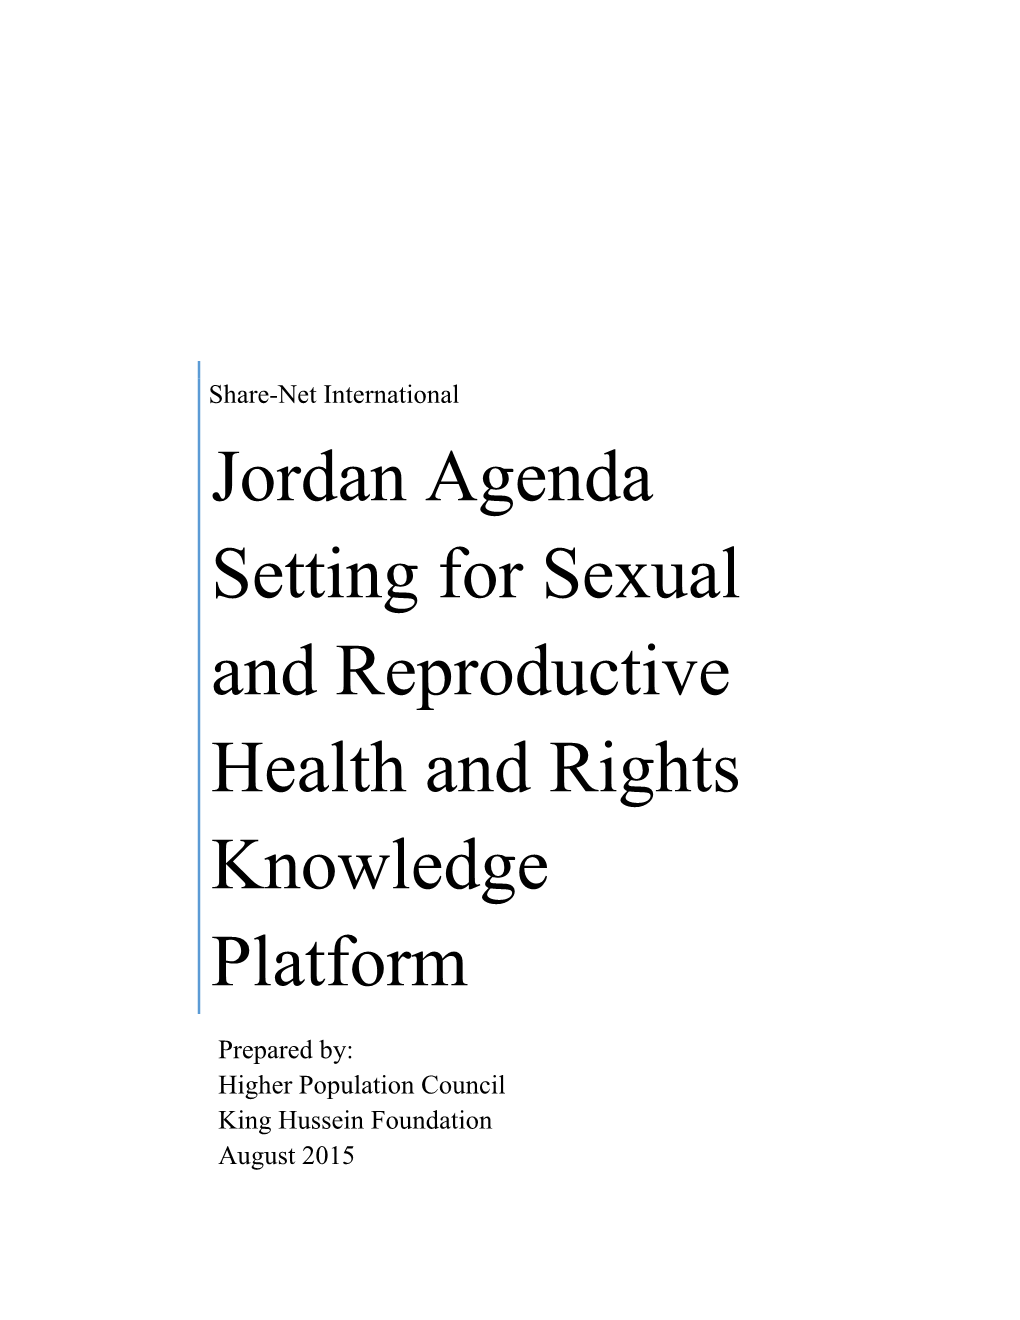 Jordan Agenda Setting for Sexual and Reproductive Health and Rights